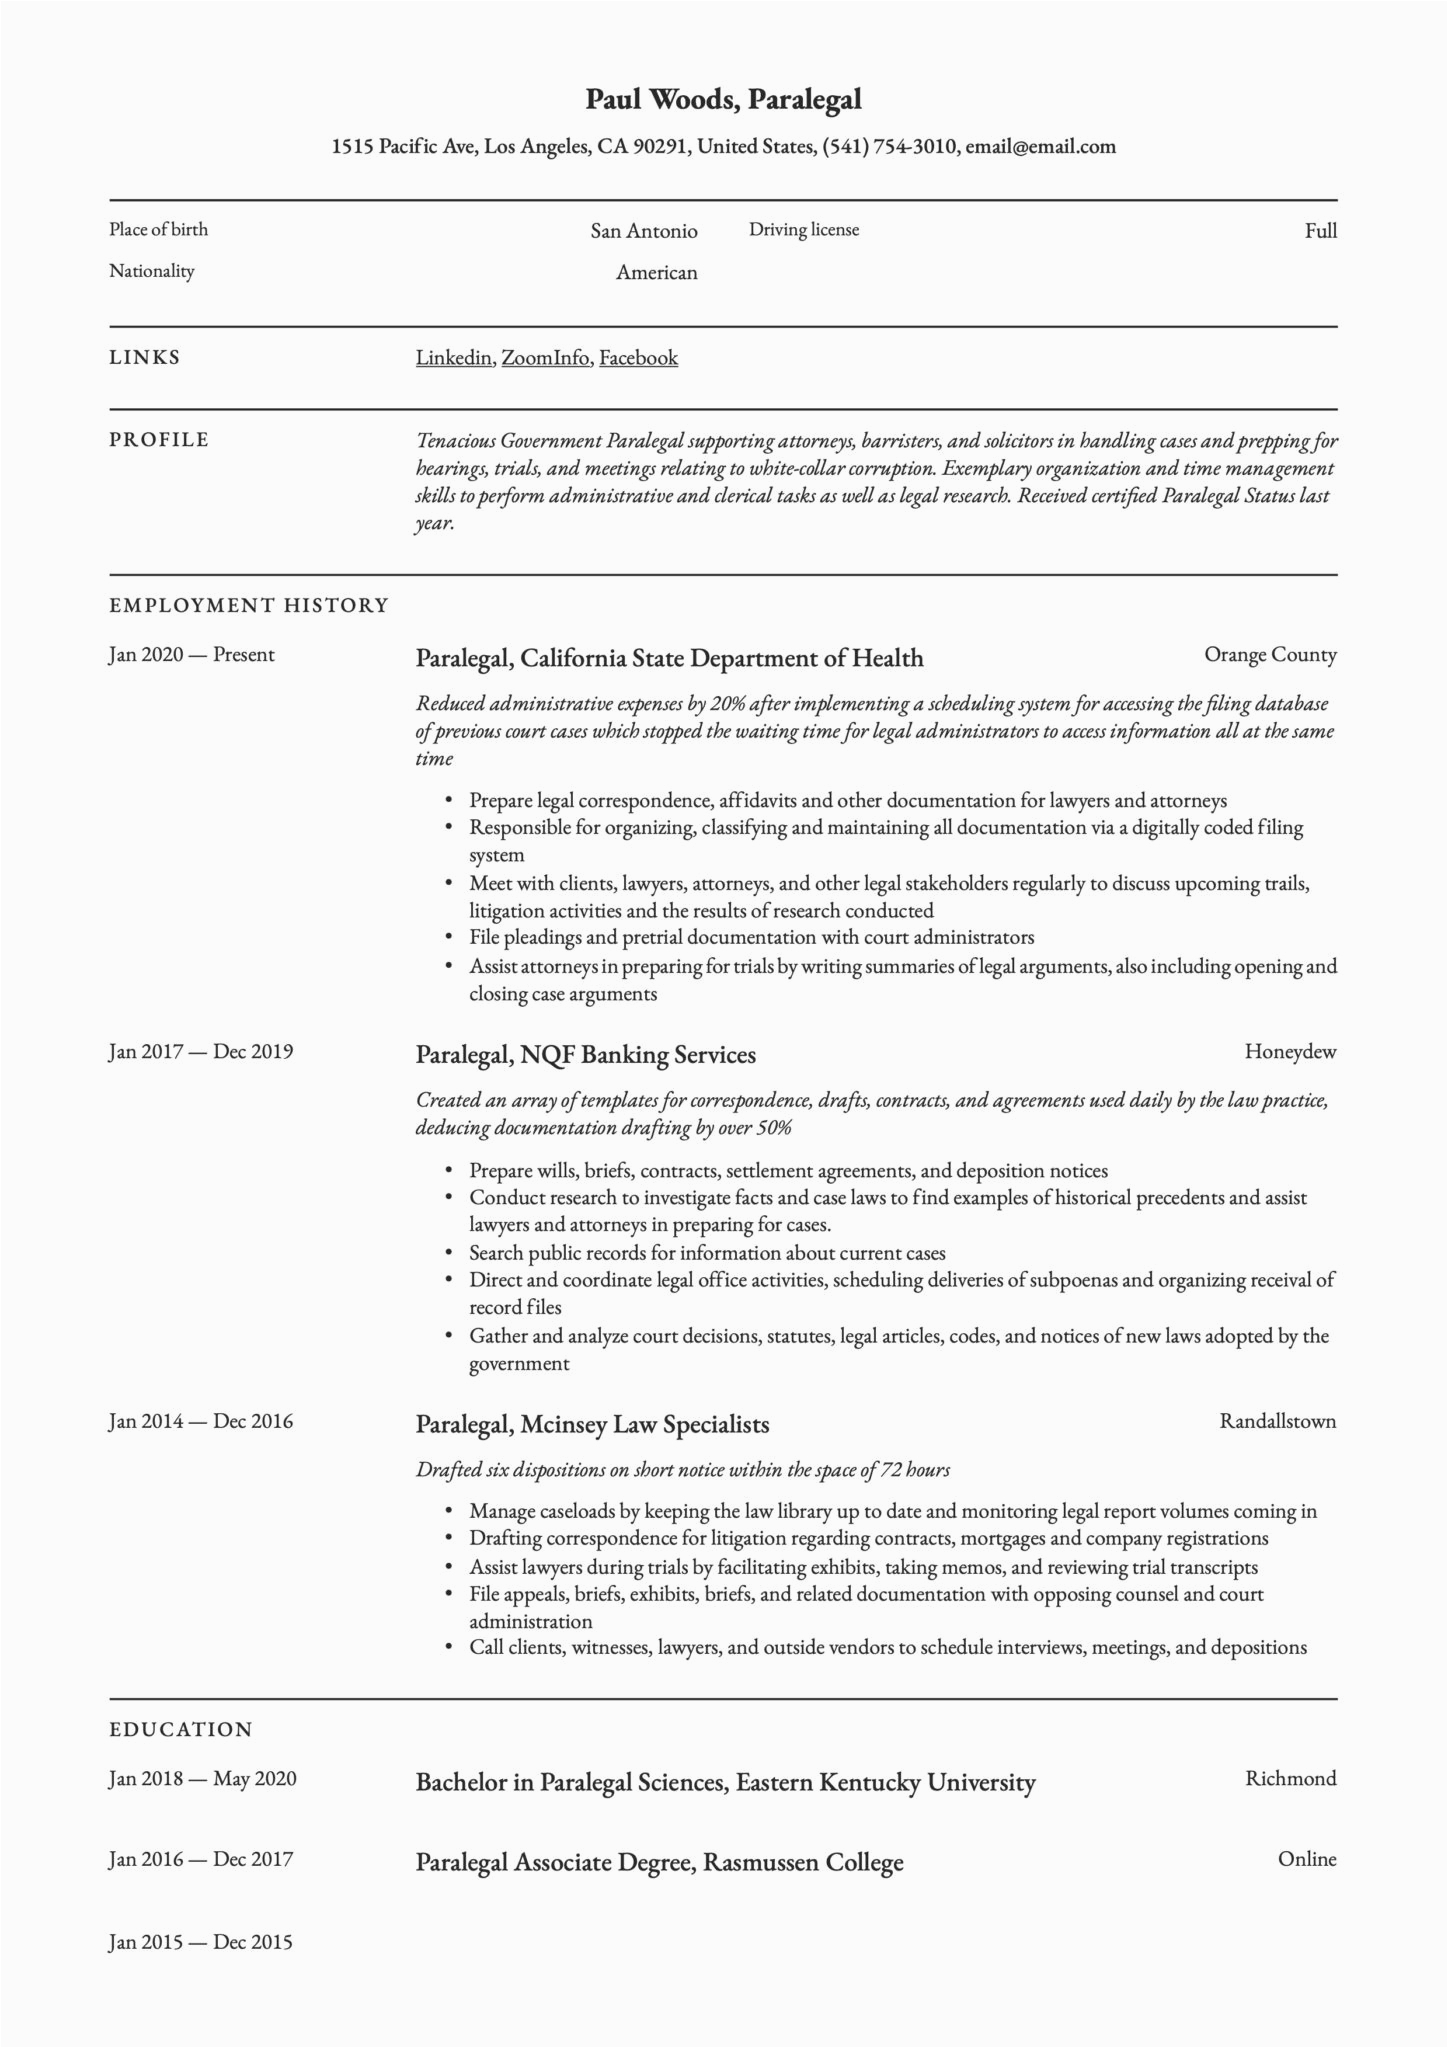 Sample Objective Statement for Paralegal Resume 19 Paralegal Resume Examples & Guide Pdf 2020